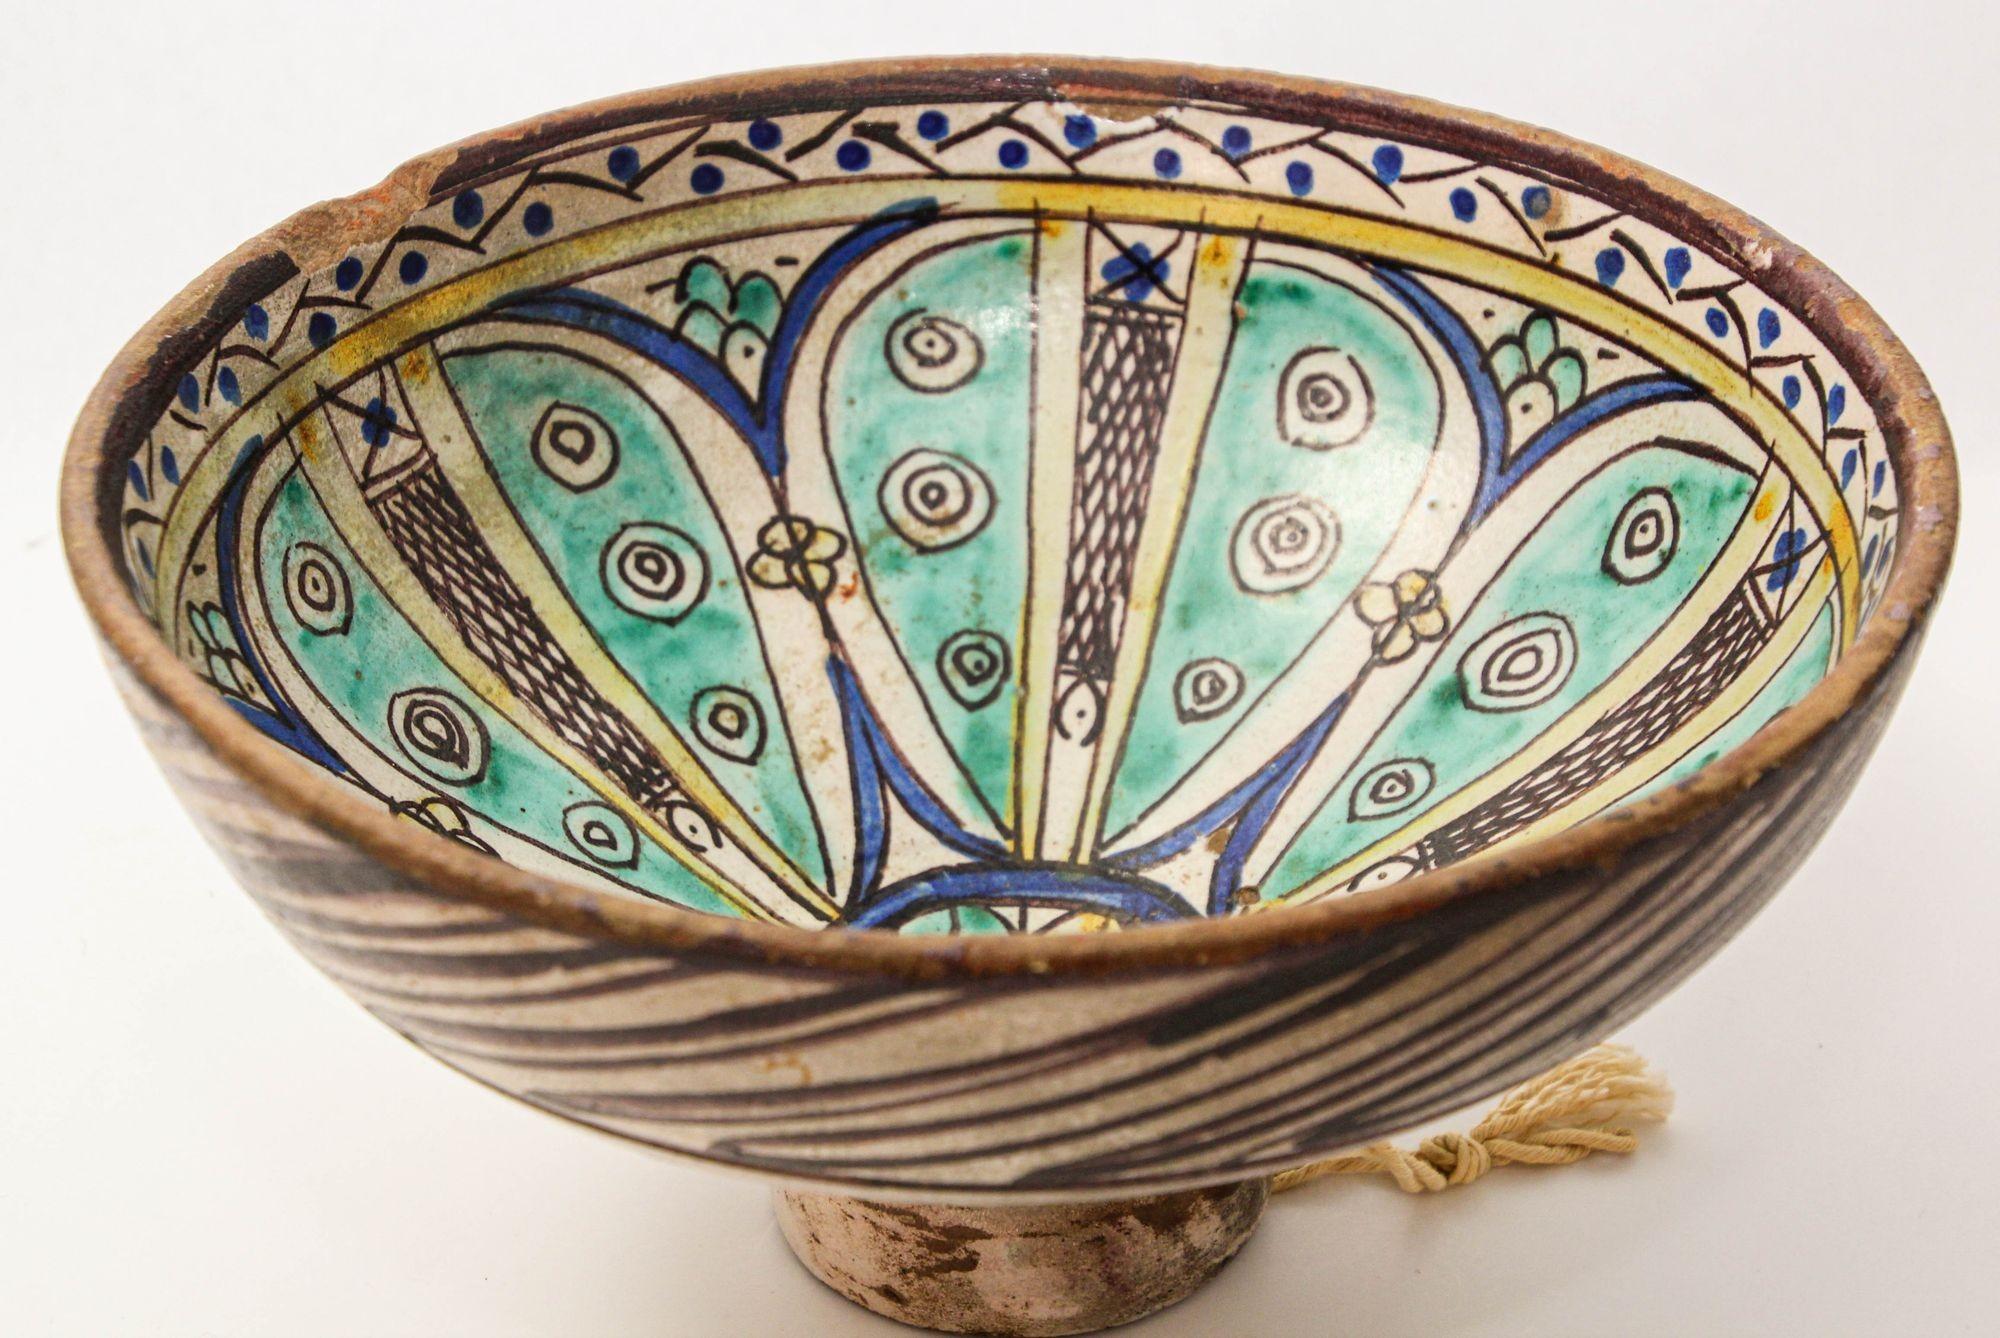 Antique 19th C. Moroccan Ceramic Bowl Polychrome Footed Dish Fez In Good Condition For Sale In North Hollywood, CA